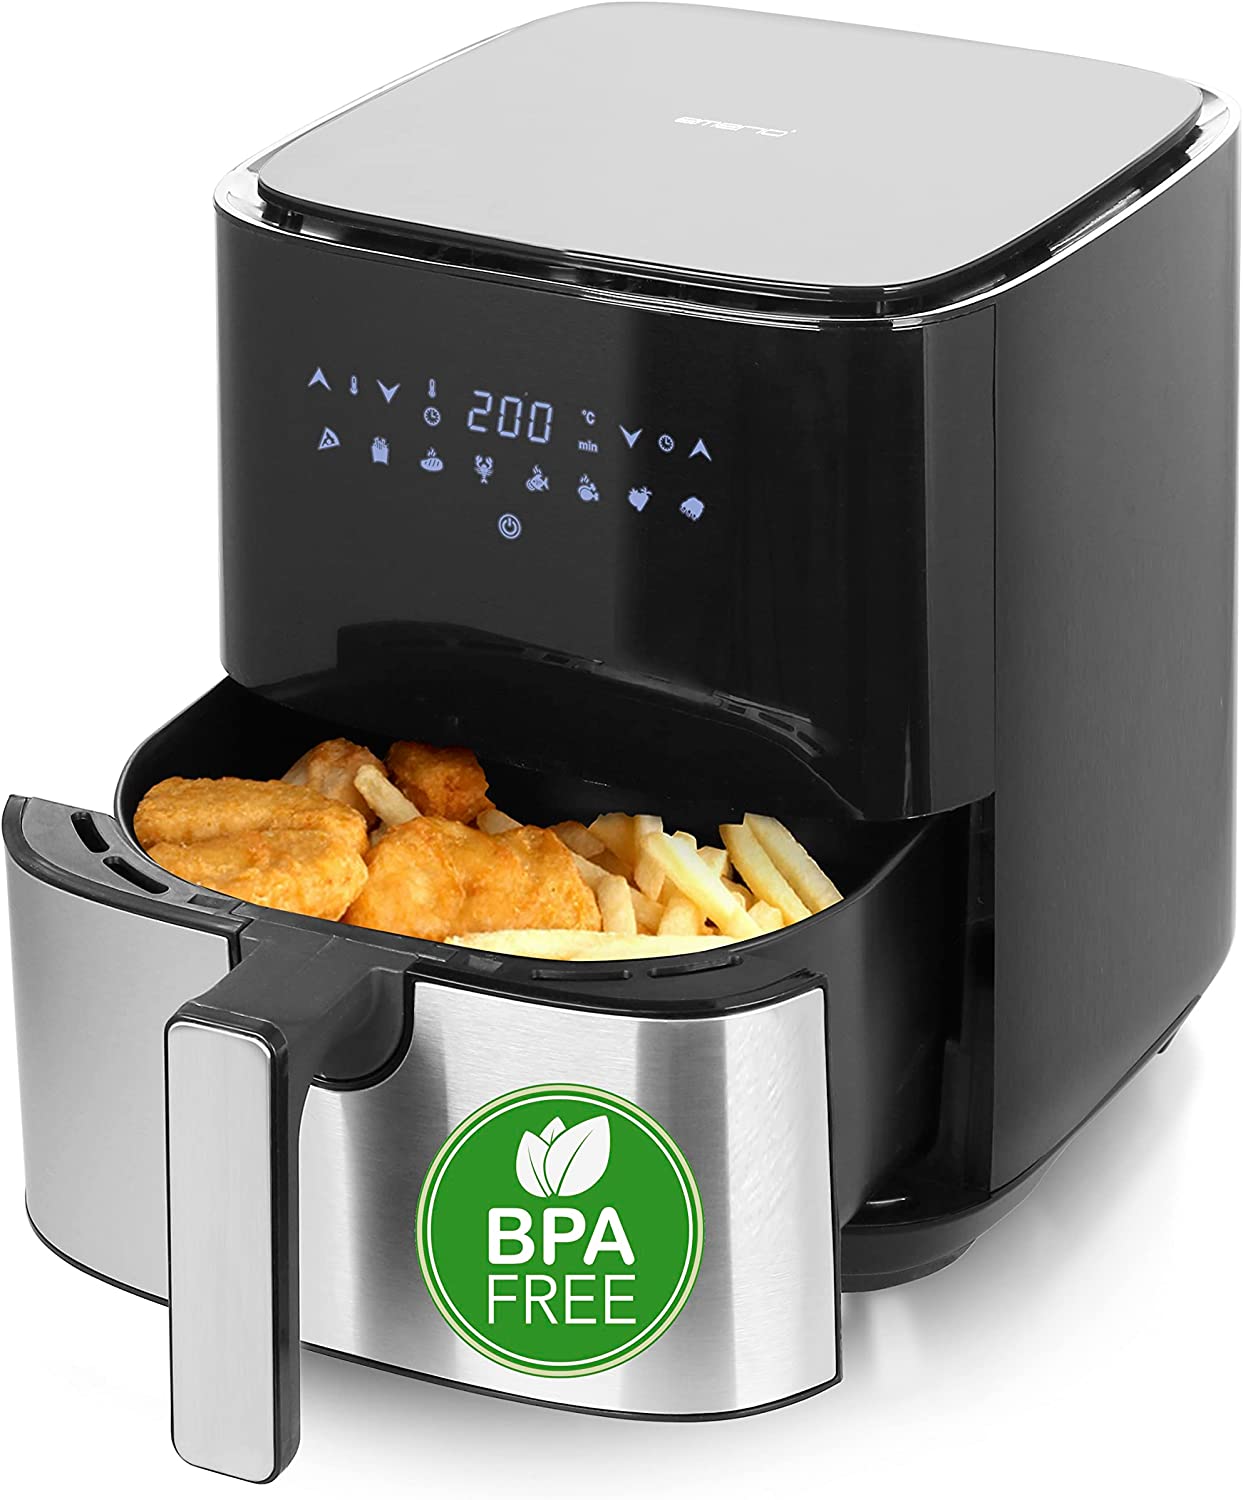 Emerio AF-126323 Hot Air Fry, 5.0 L Volume for the Whole Family, Stainless Steel, 1450 Watt, BPA-Free, Digital, 8 Automatic Programs Black